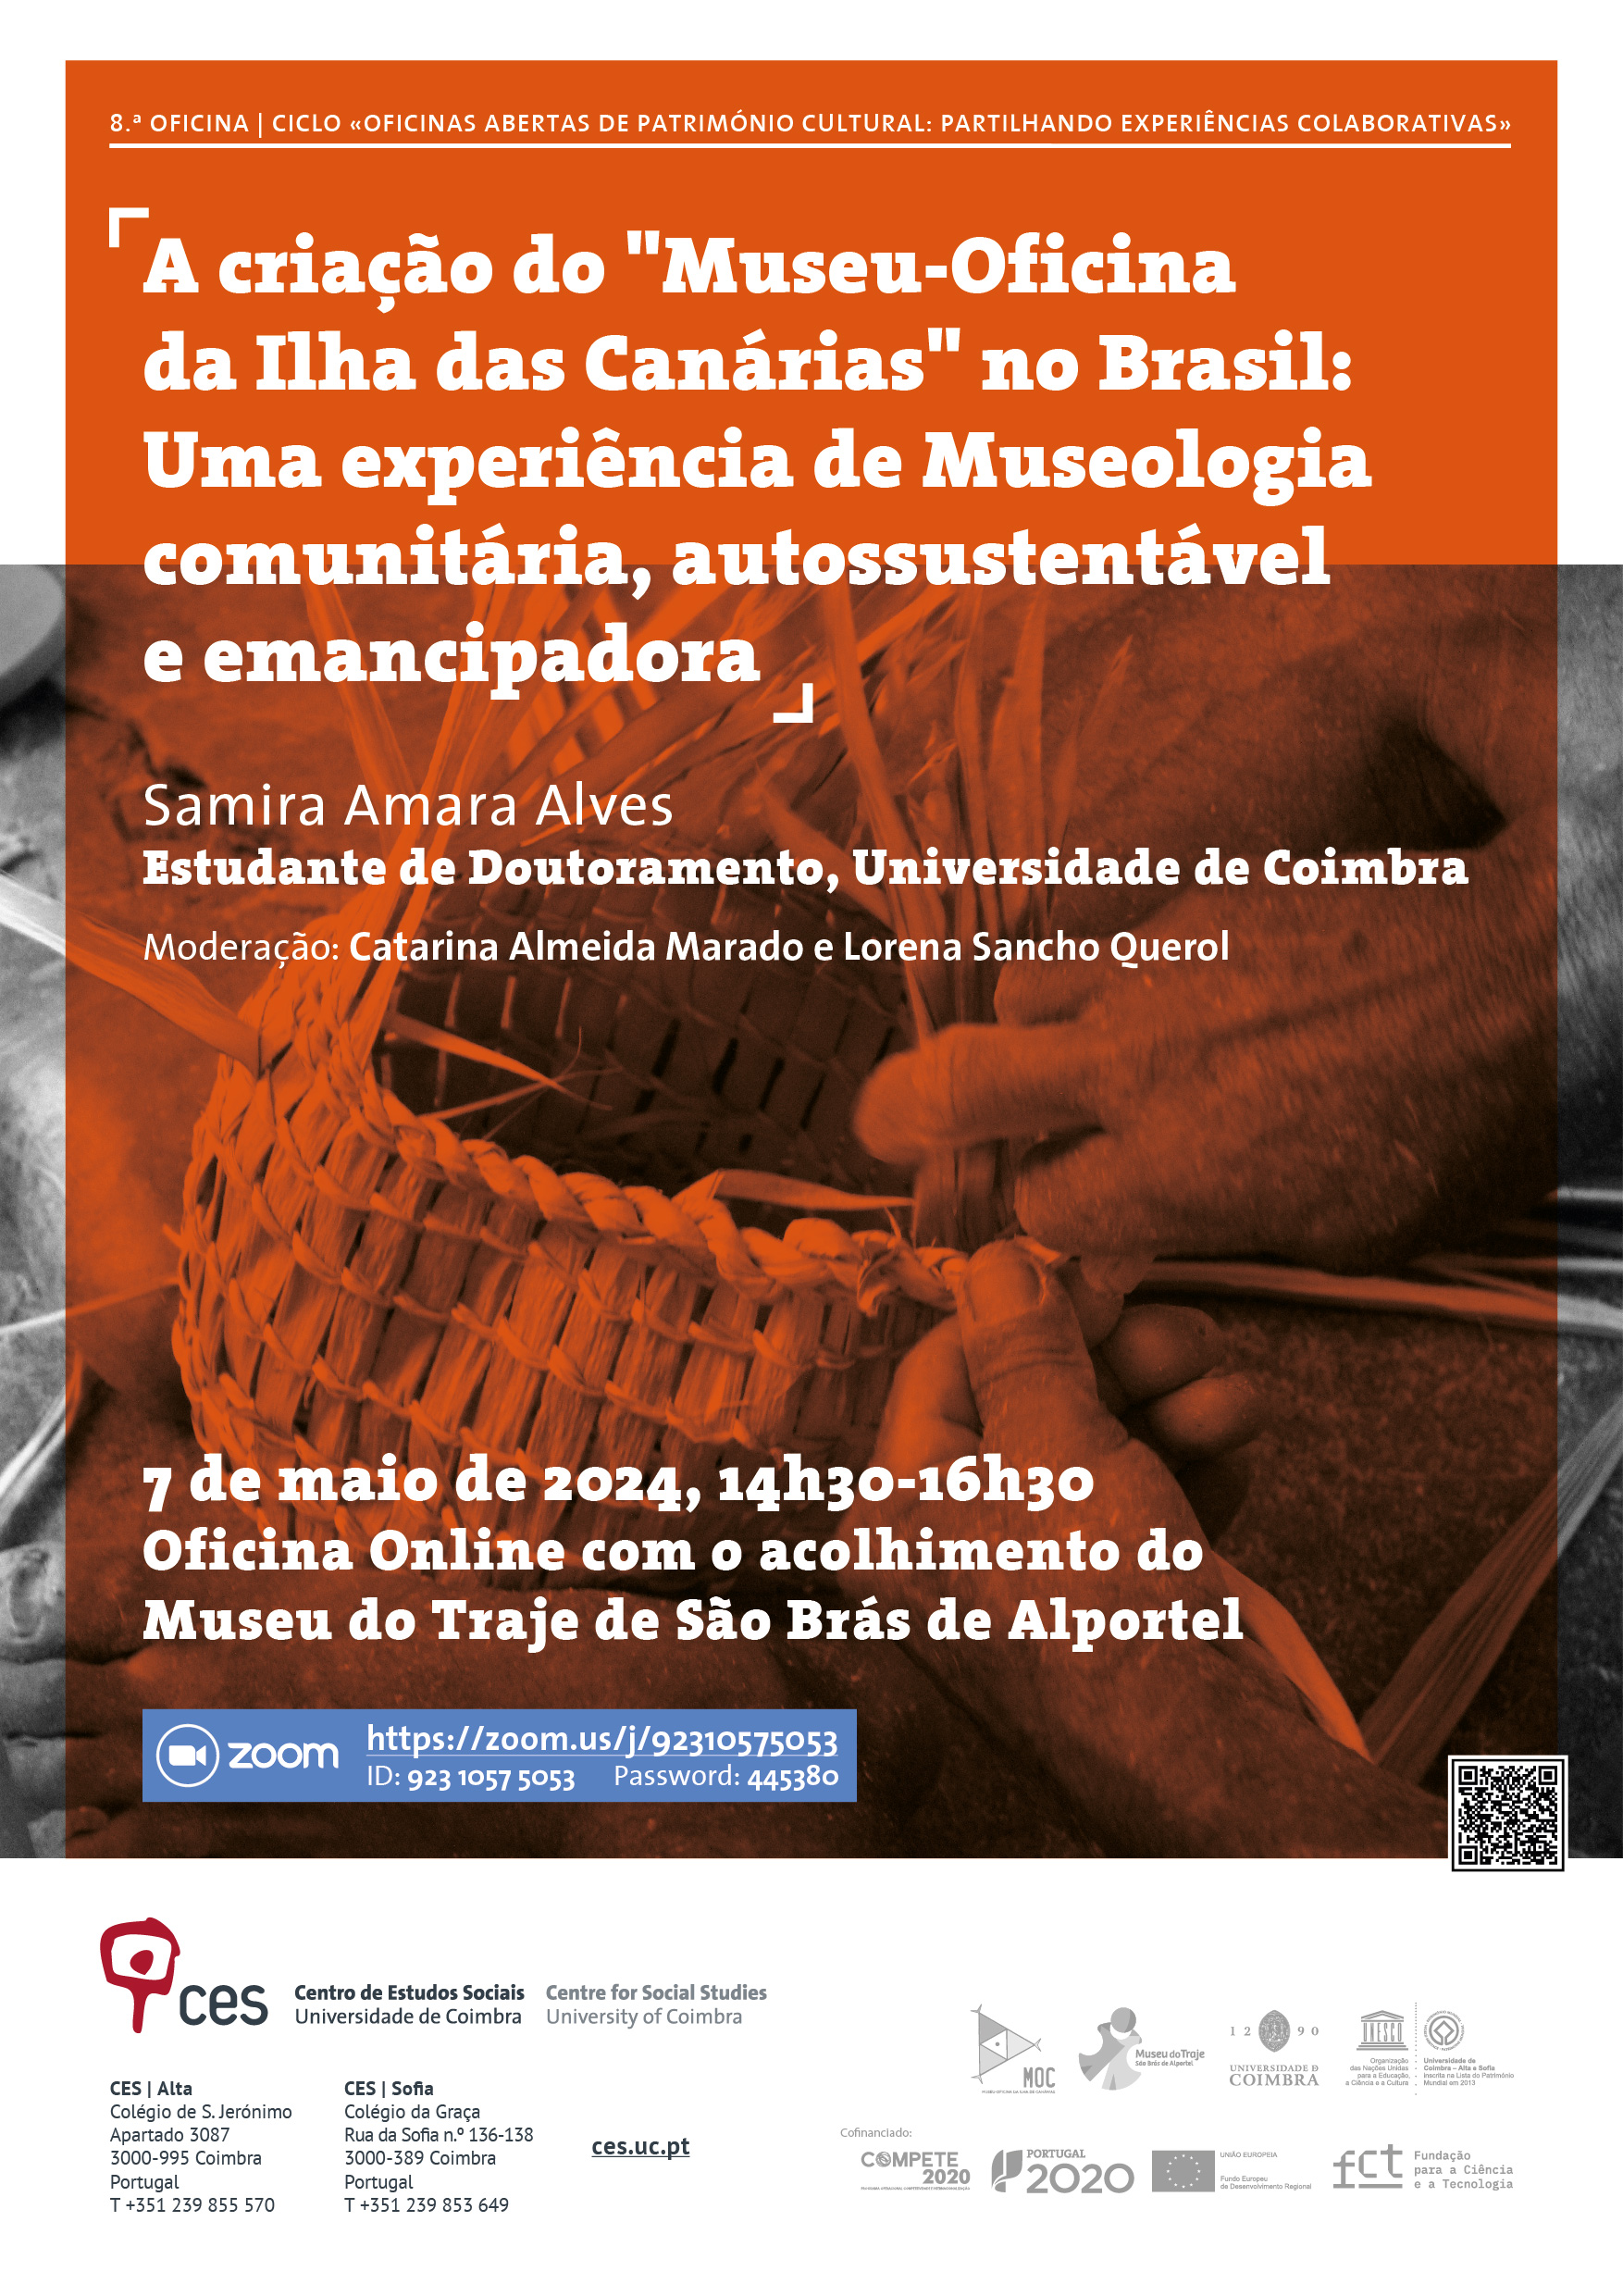 8th Workshop | The creation of the “Canary Island Museum-Workshop” in Brazil: An experience of community, self-sustainable and emancipatory Museology<span id="edit_45640"><script>$(function() { $('#edit_45640').load( "/myces/user/editobj.php?tipo=evento&id=45640" ); });</script></span>